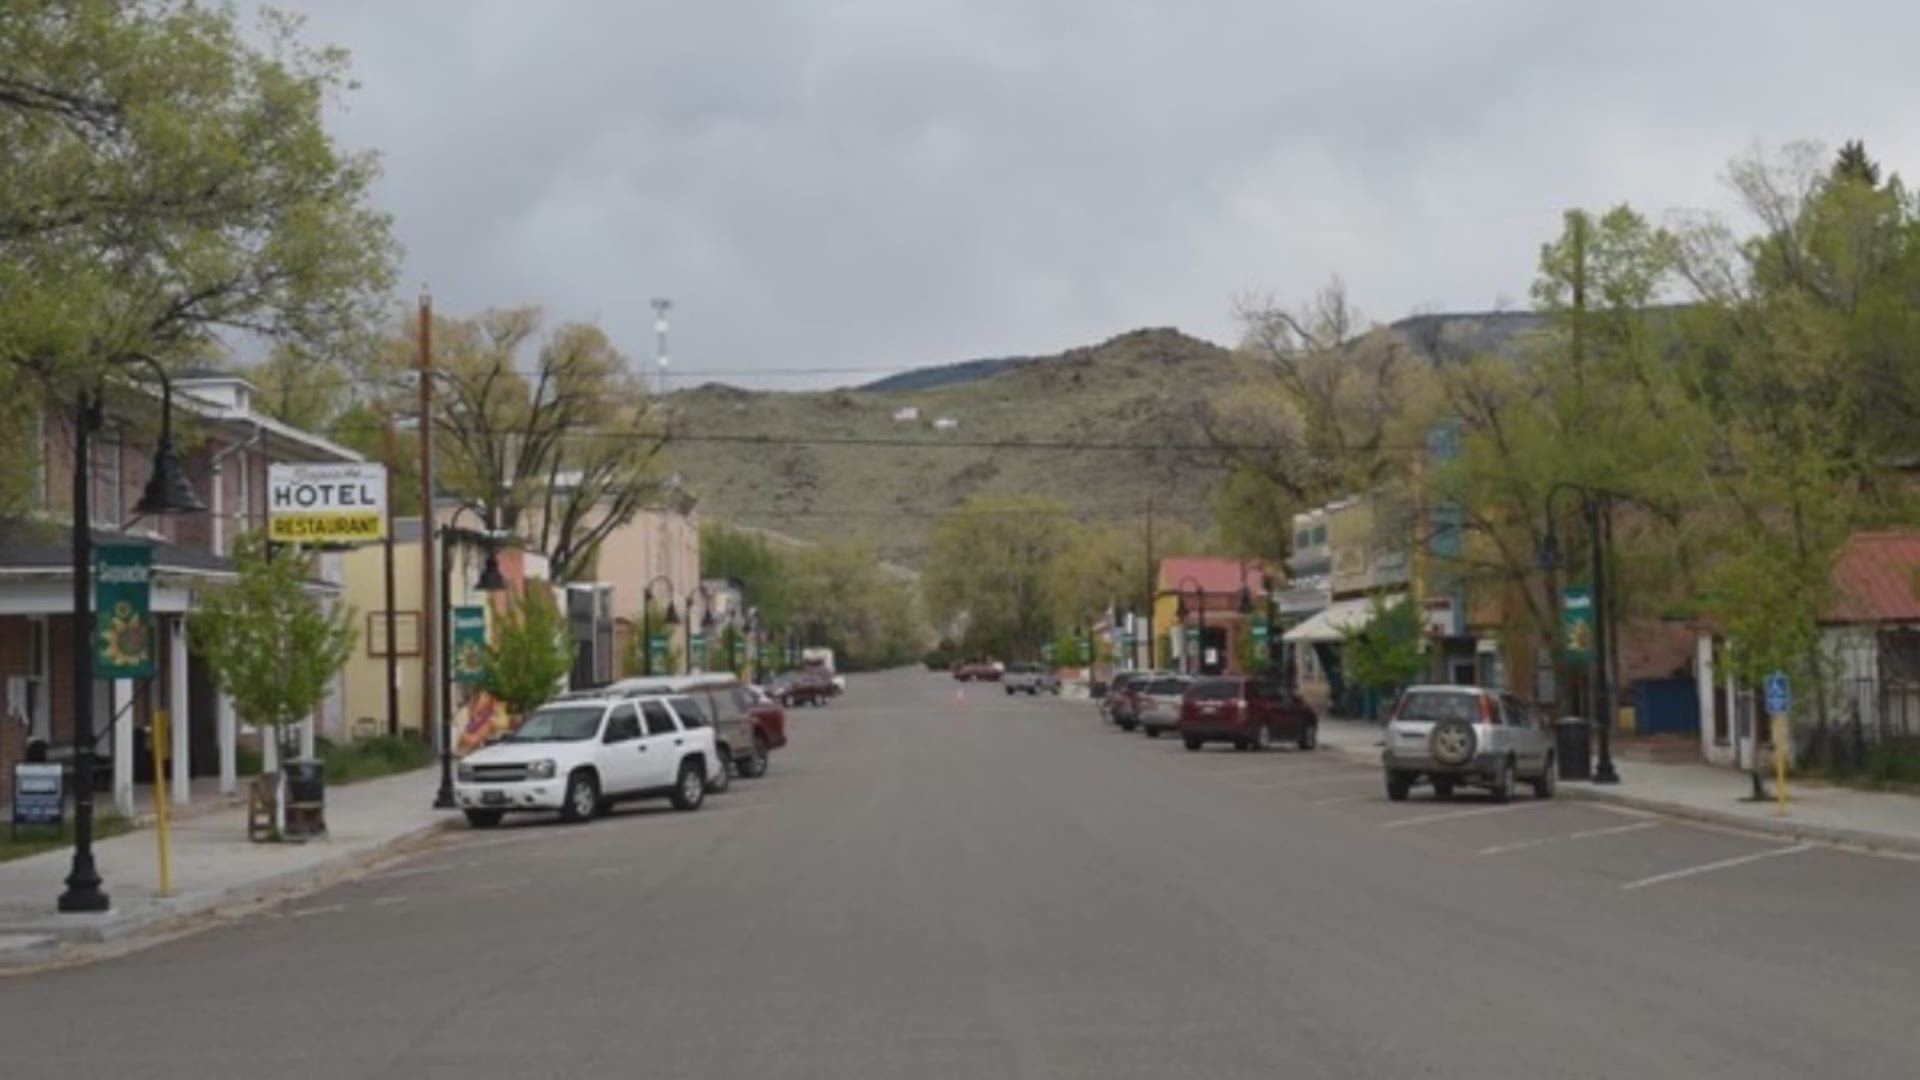 Saguache, Colorado is located off US 285 about three hours from both Denver and Durango. It's a haven for travelers, but also for artists seeking a simpler life.